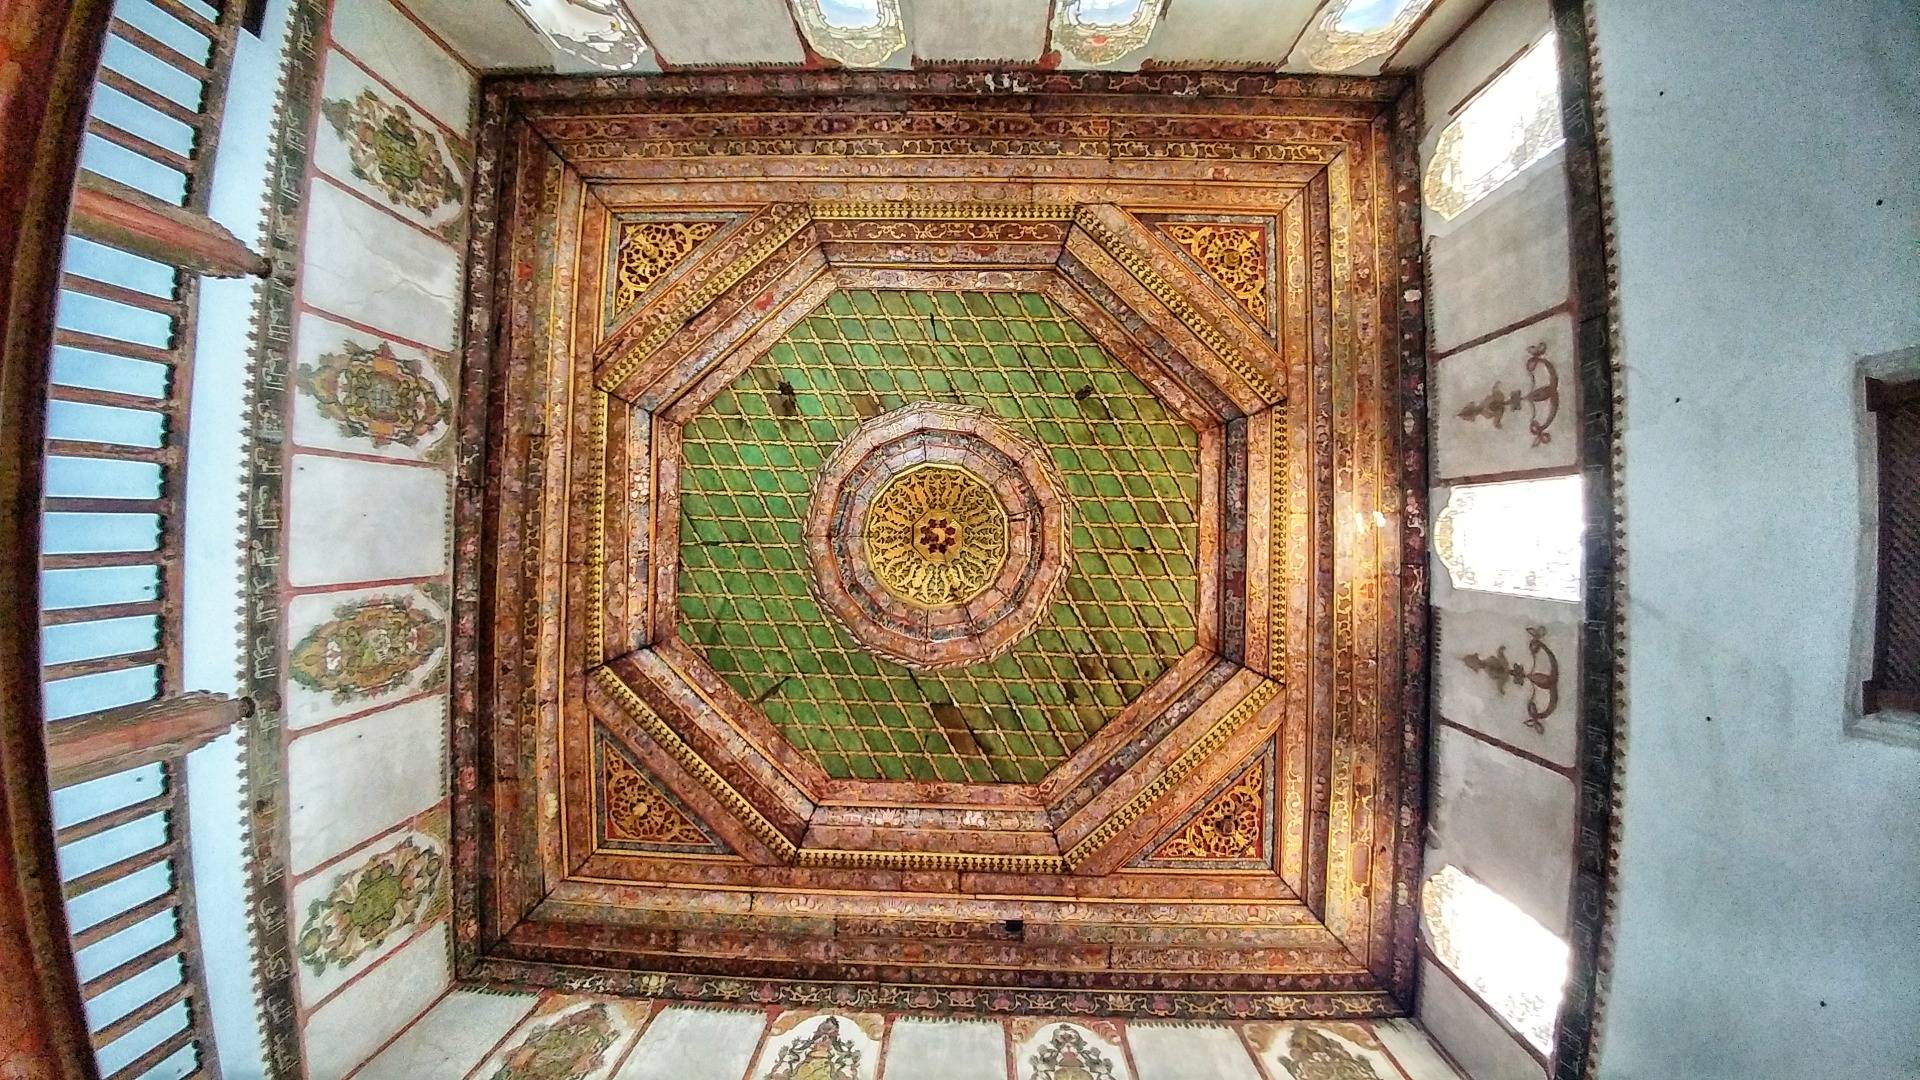 A mosaic in the Mosque